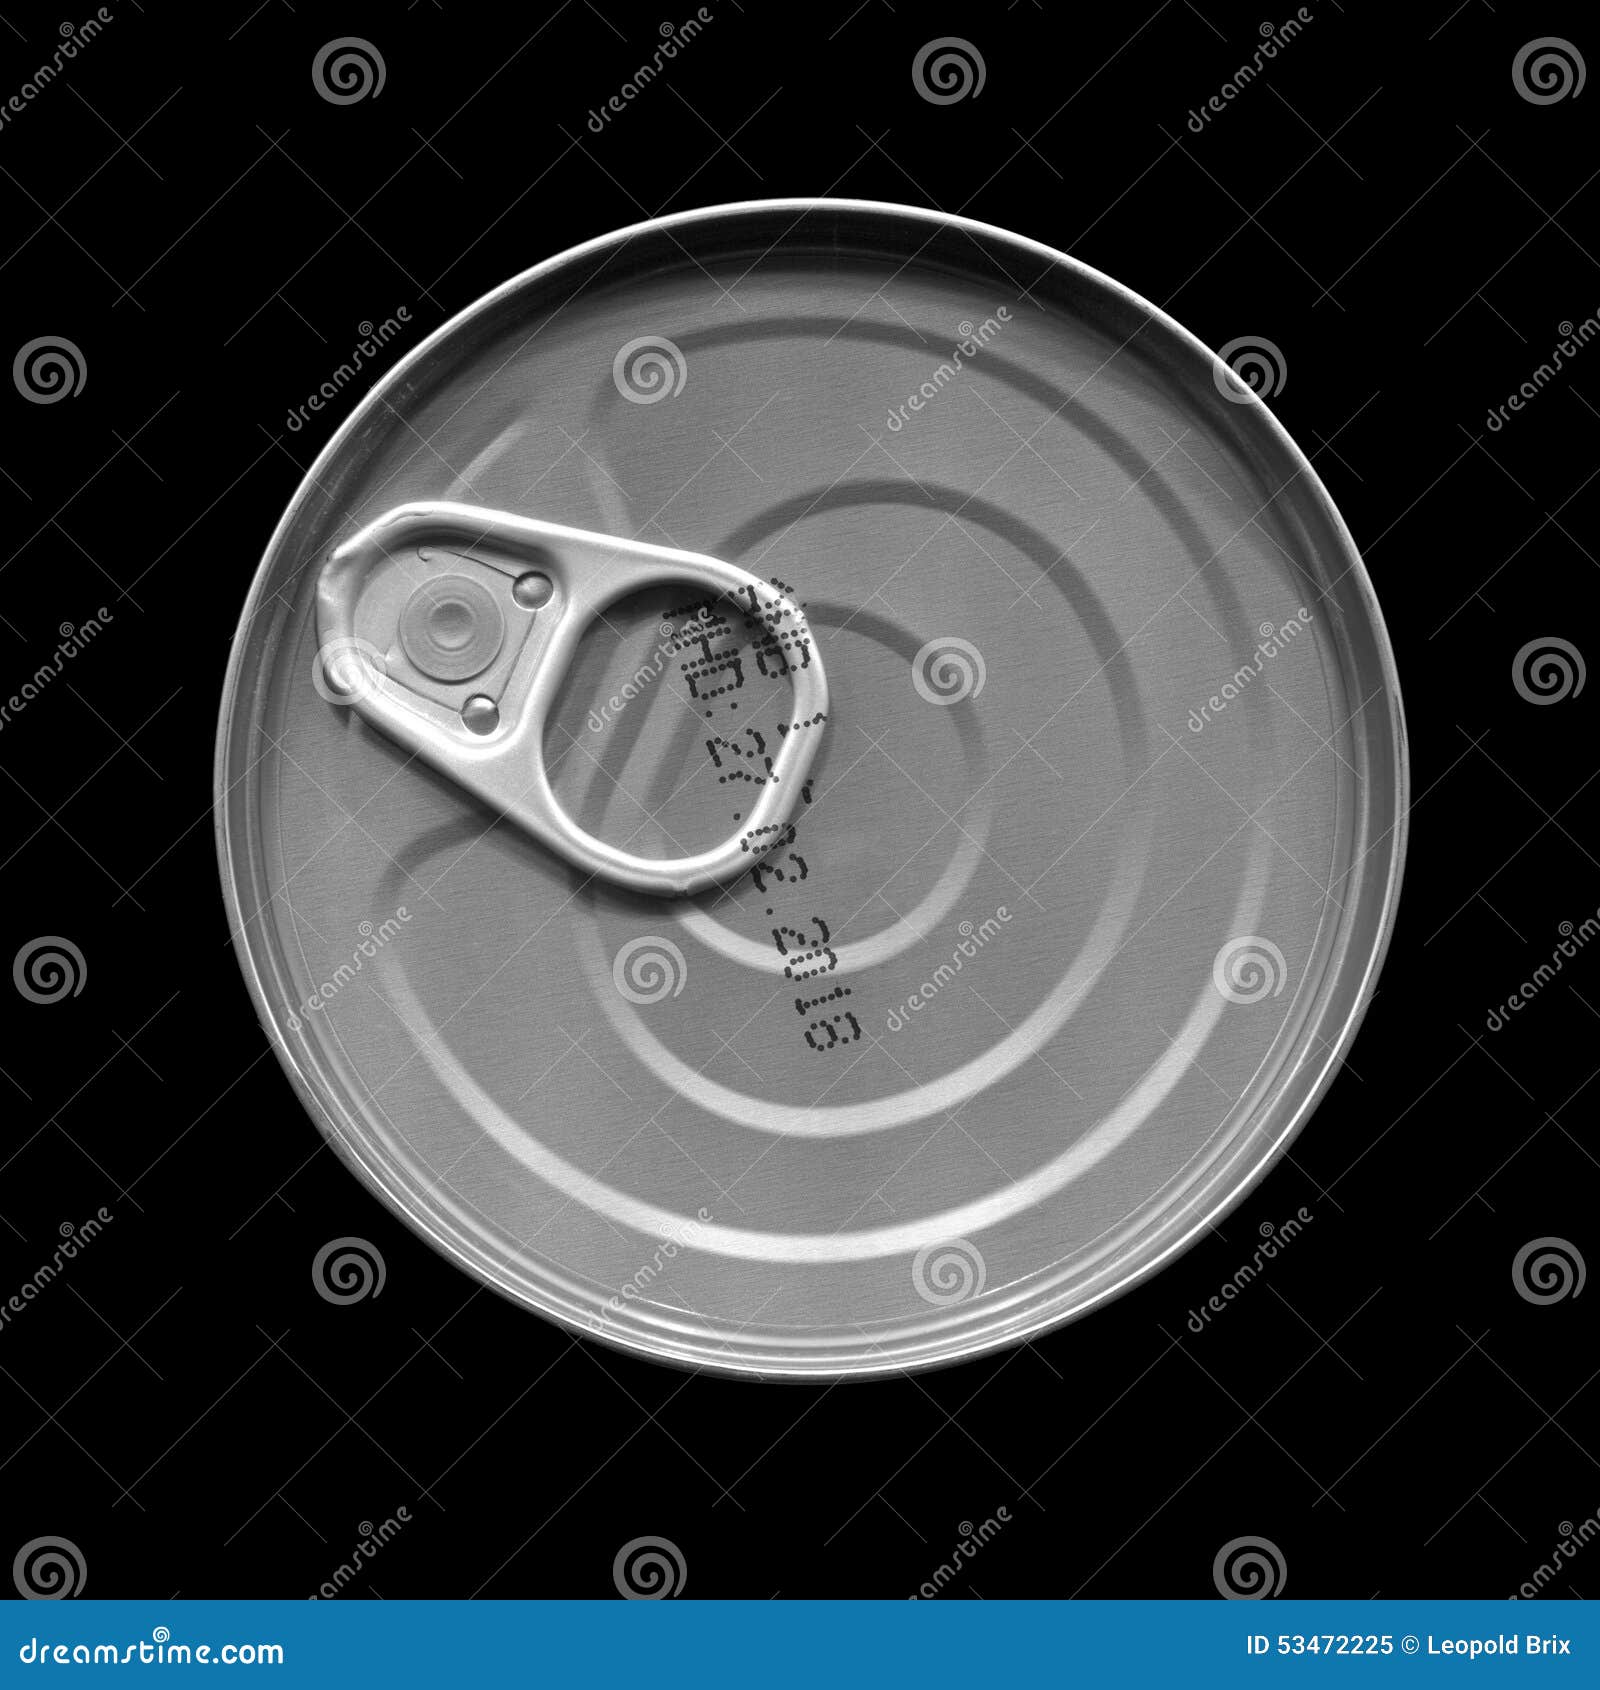 Download Tin Can With Pull Tab Stock Image Image Of Pull Imprint 53472225 Yellowimages Mockups